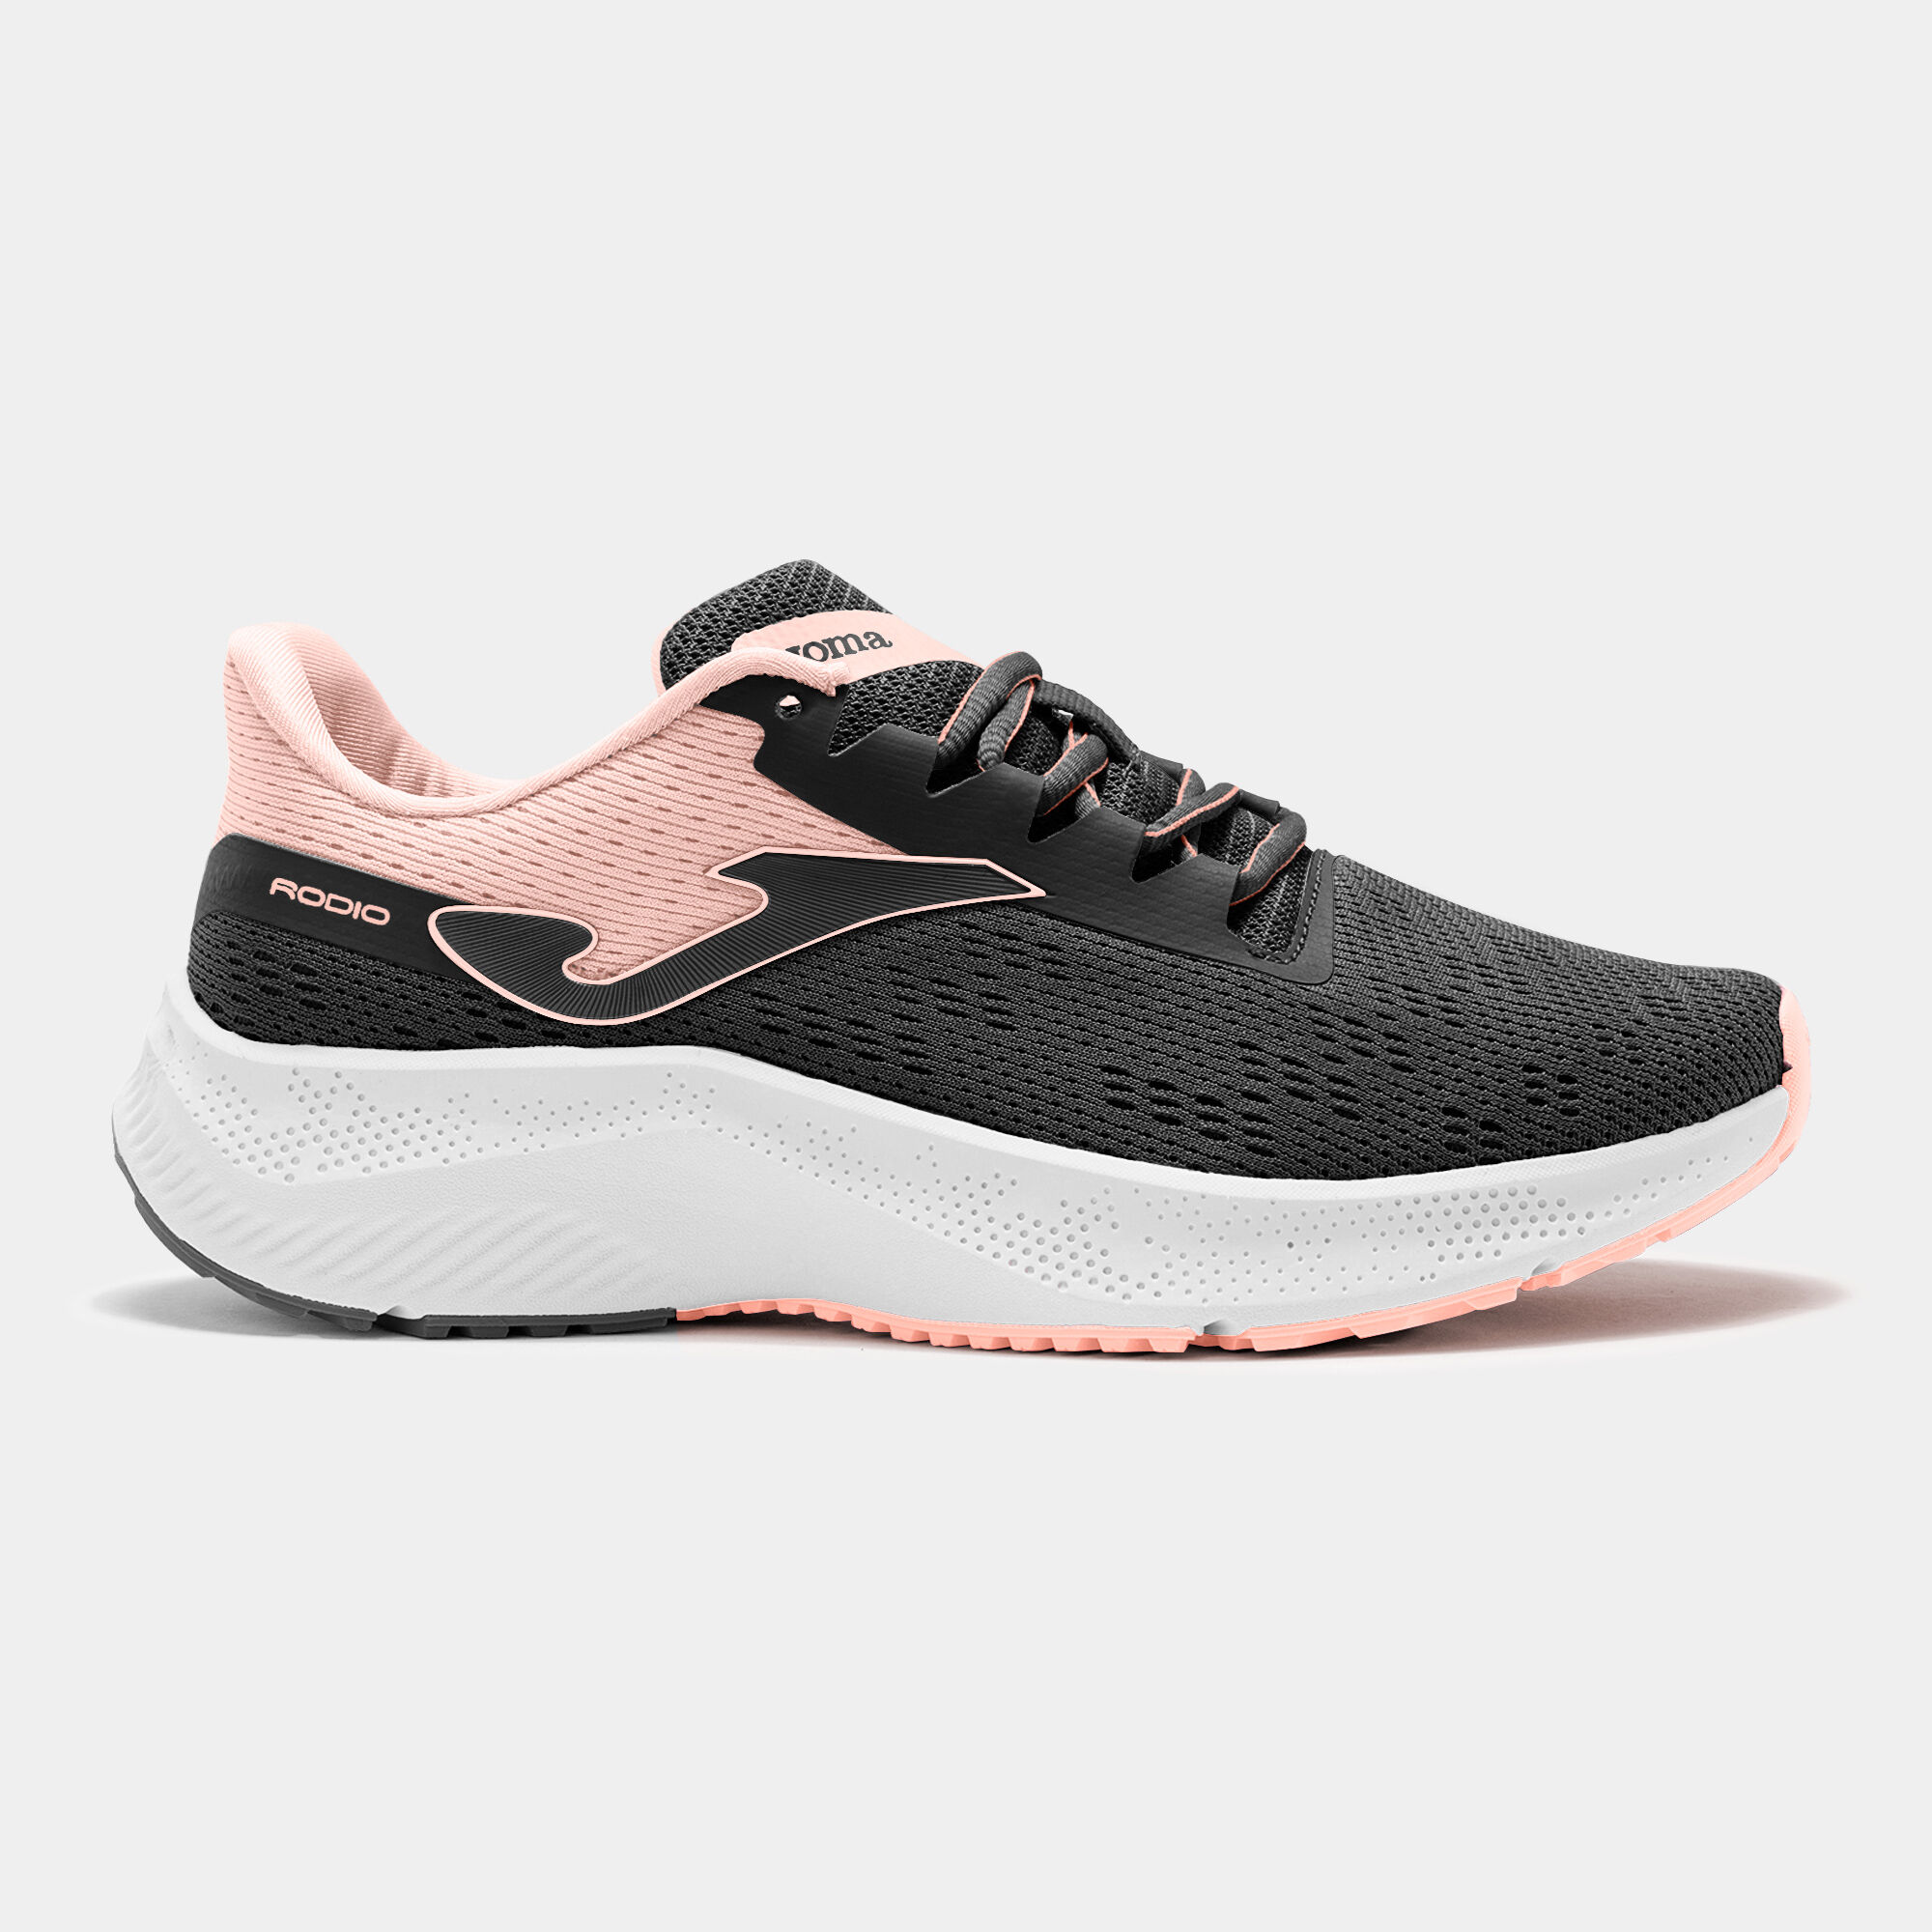 Running shoes Rodio 22 woman black pink